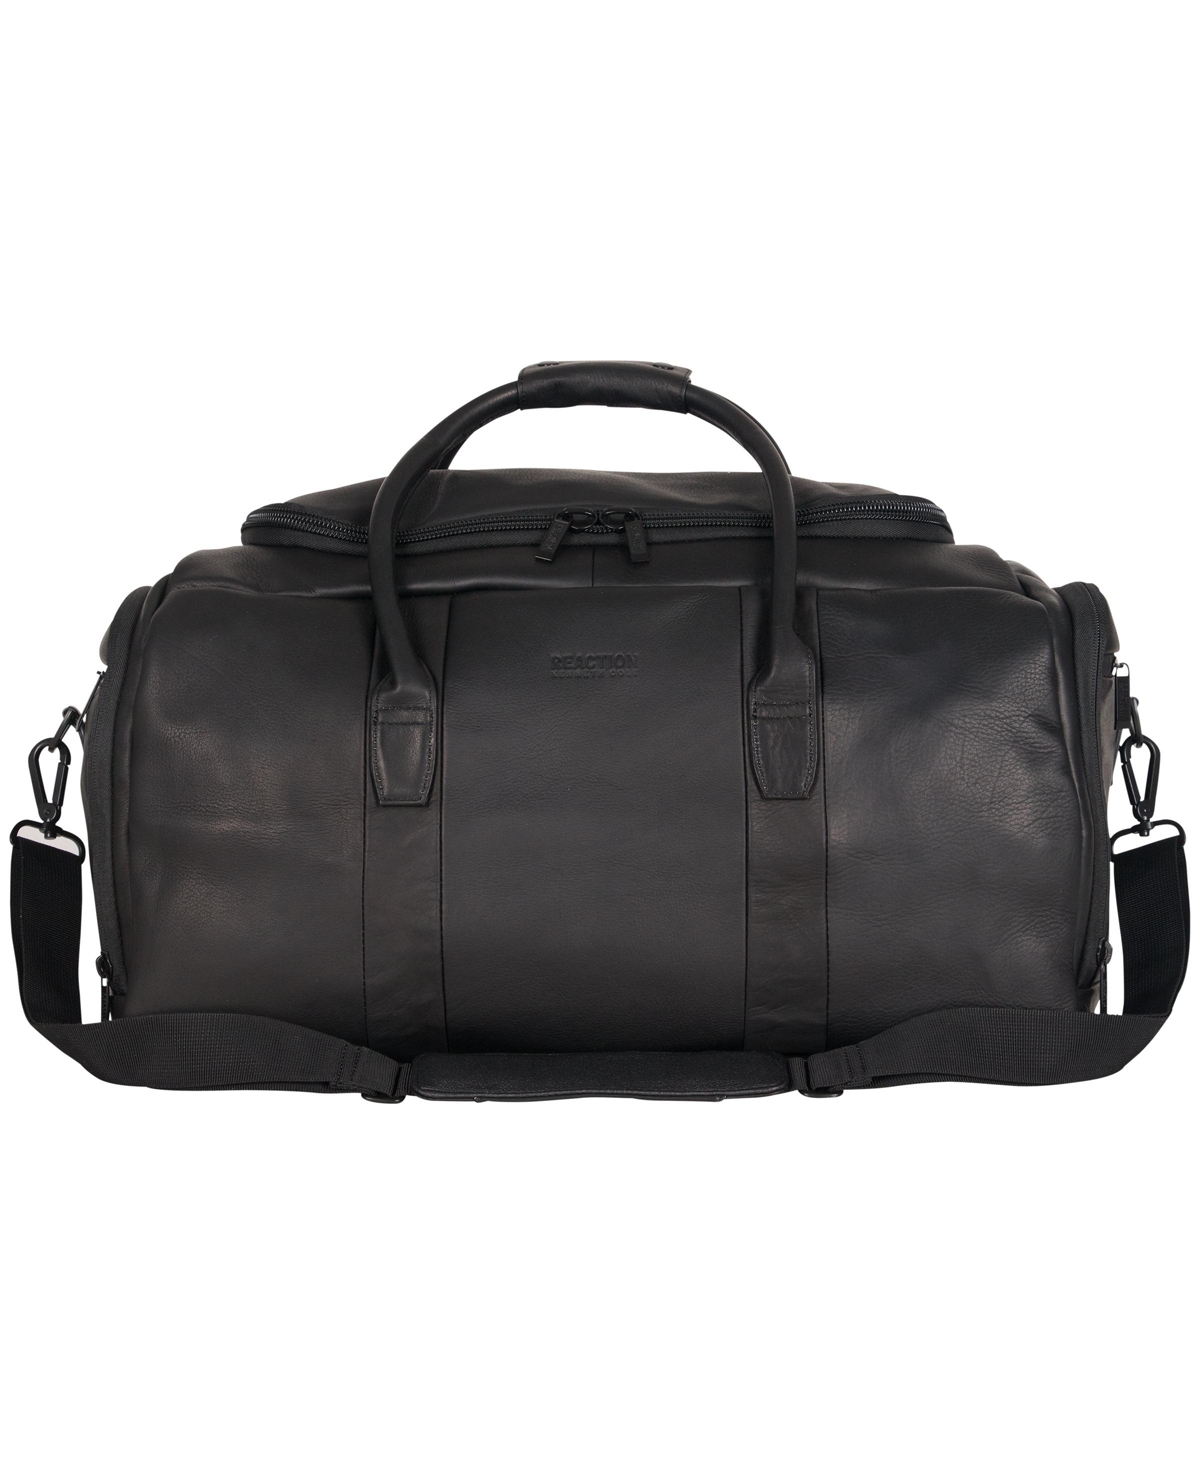 Colombian Leather 20" Single Compartment Top Load Travel Duffel Bag - Cognac